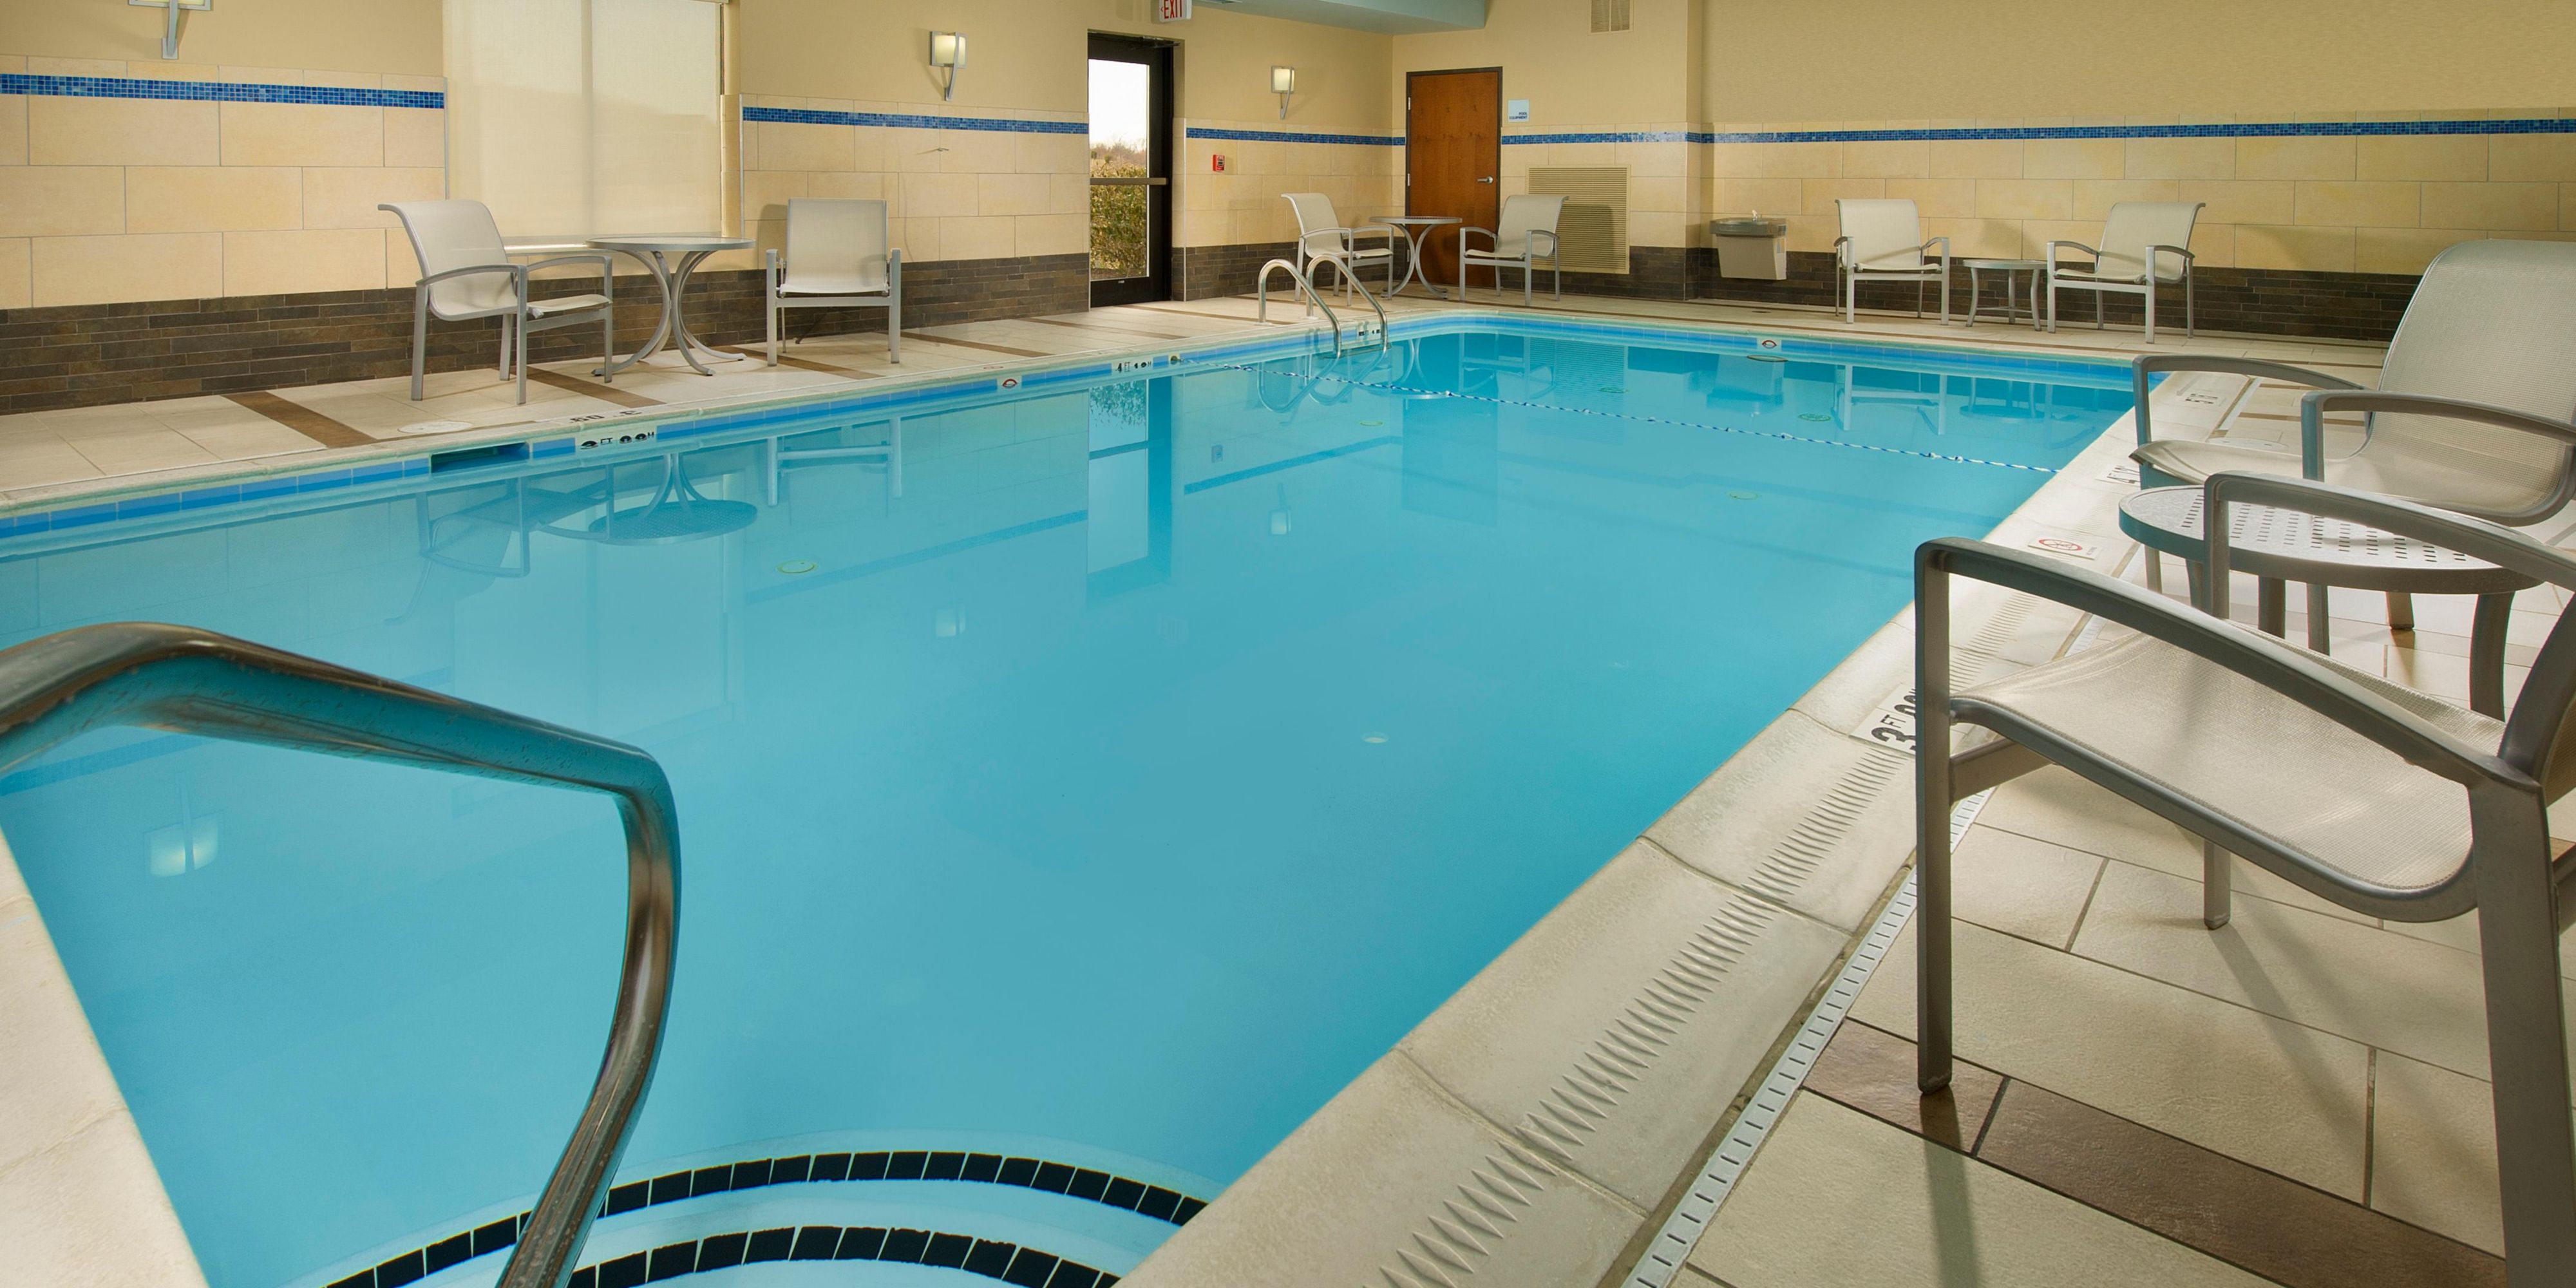 Our Indoor Saltwater Pool is available from 10am-10pm each day.